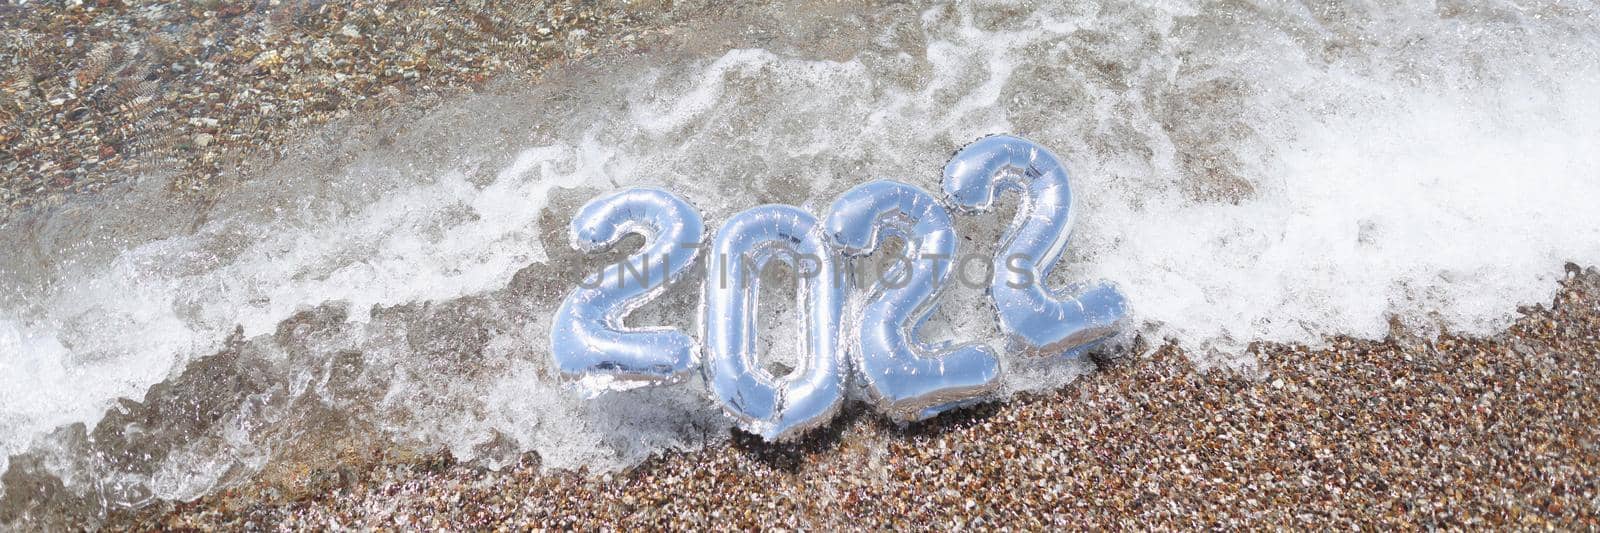 Helium balloons with numbers 2022 lying on sea wave closeup background. Travel in new year concept